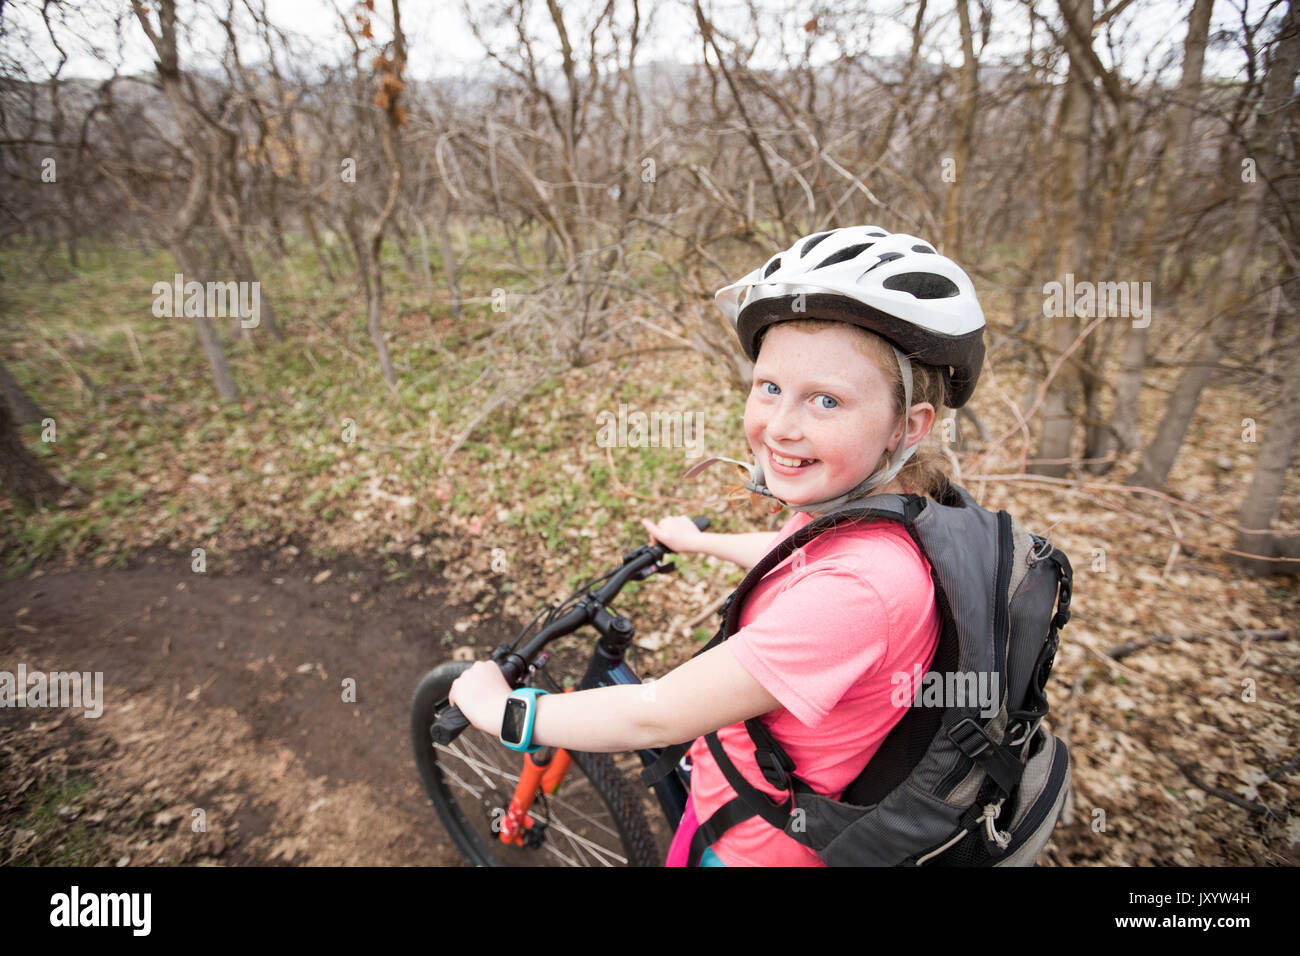 Caucasian girl riding bicycle on forest path Stock Photo